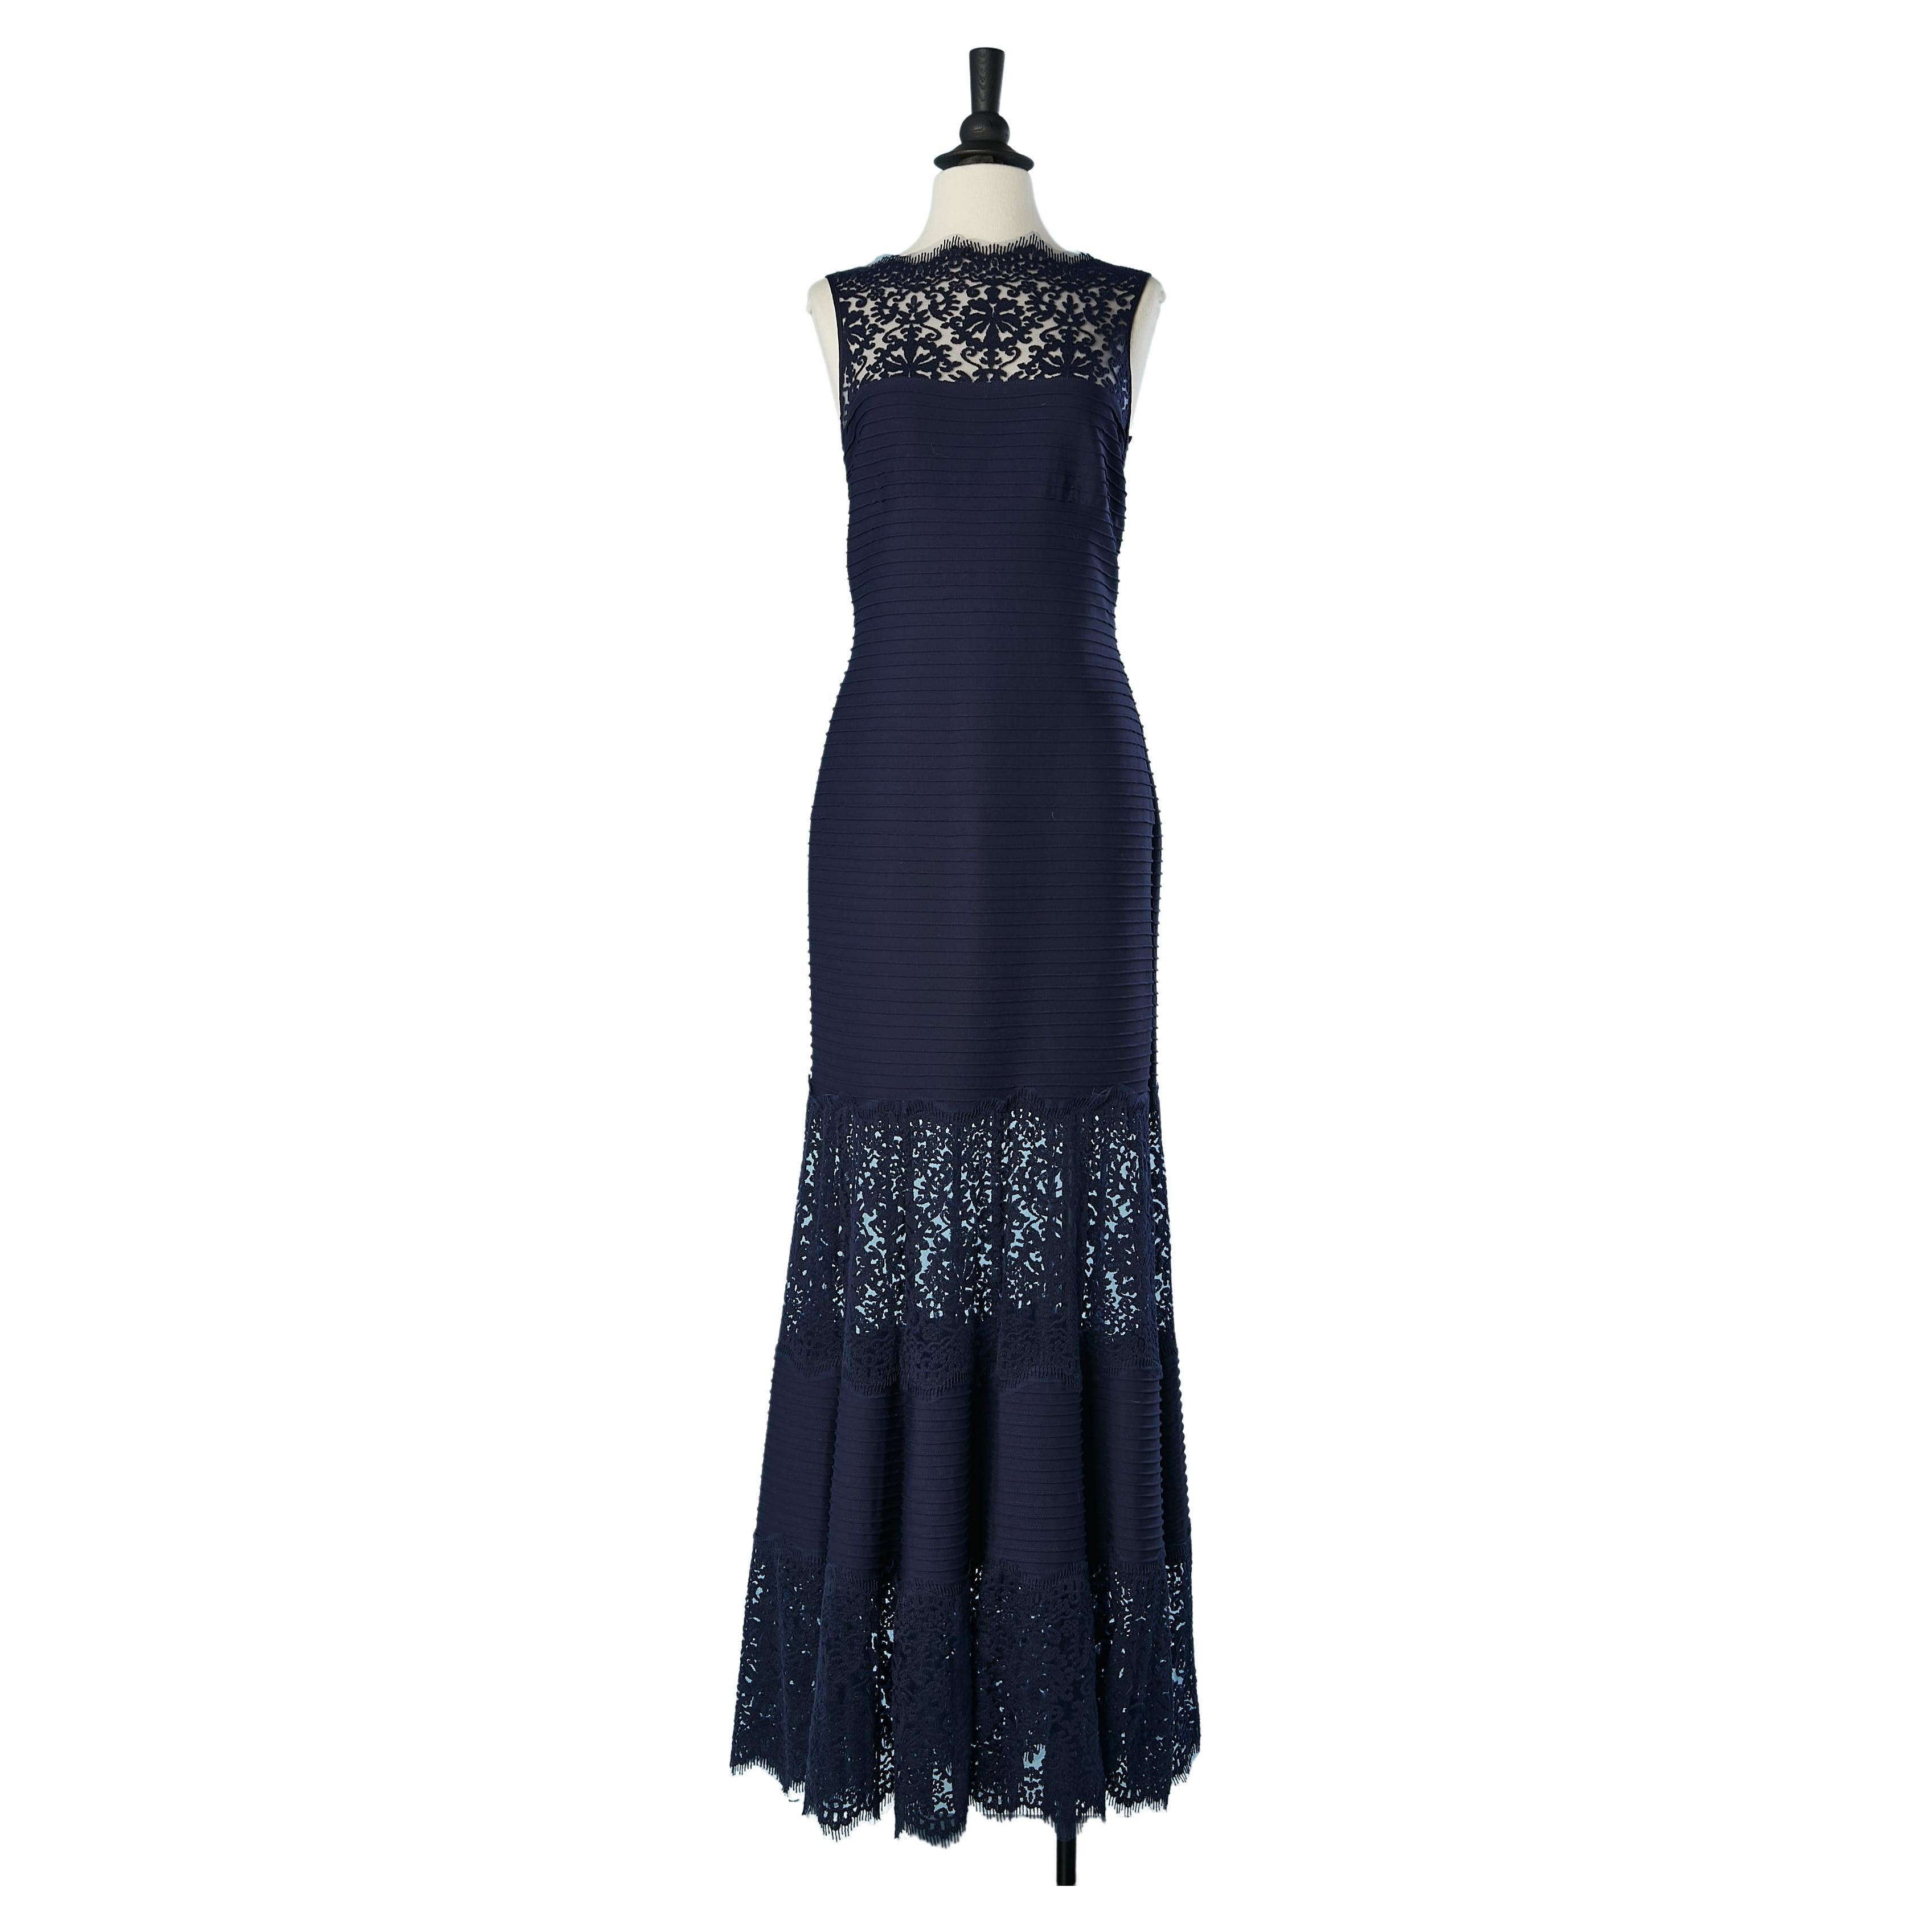 Navy blue evening dress in top-stitched jersey and lace Tadashi Shoji New 